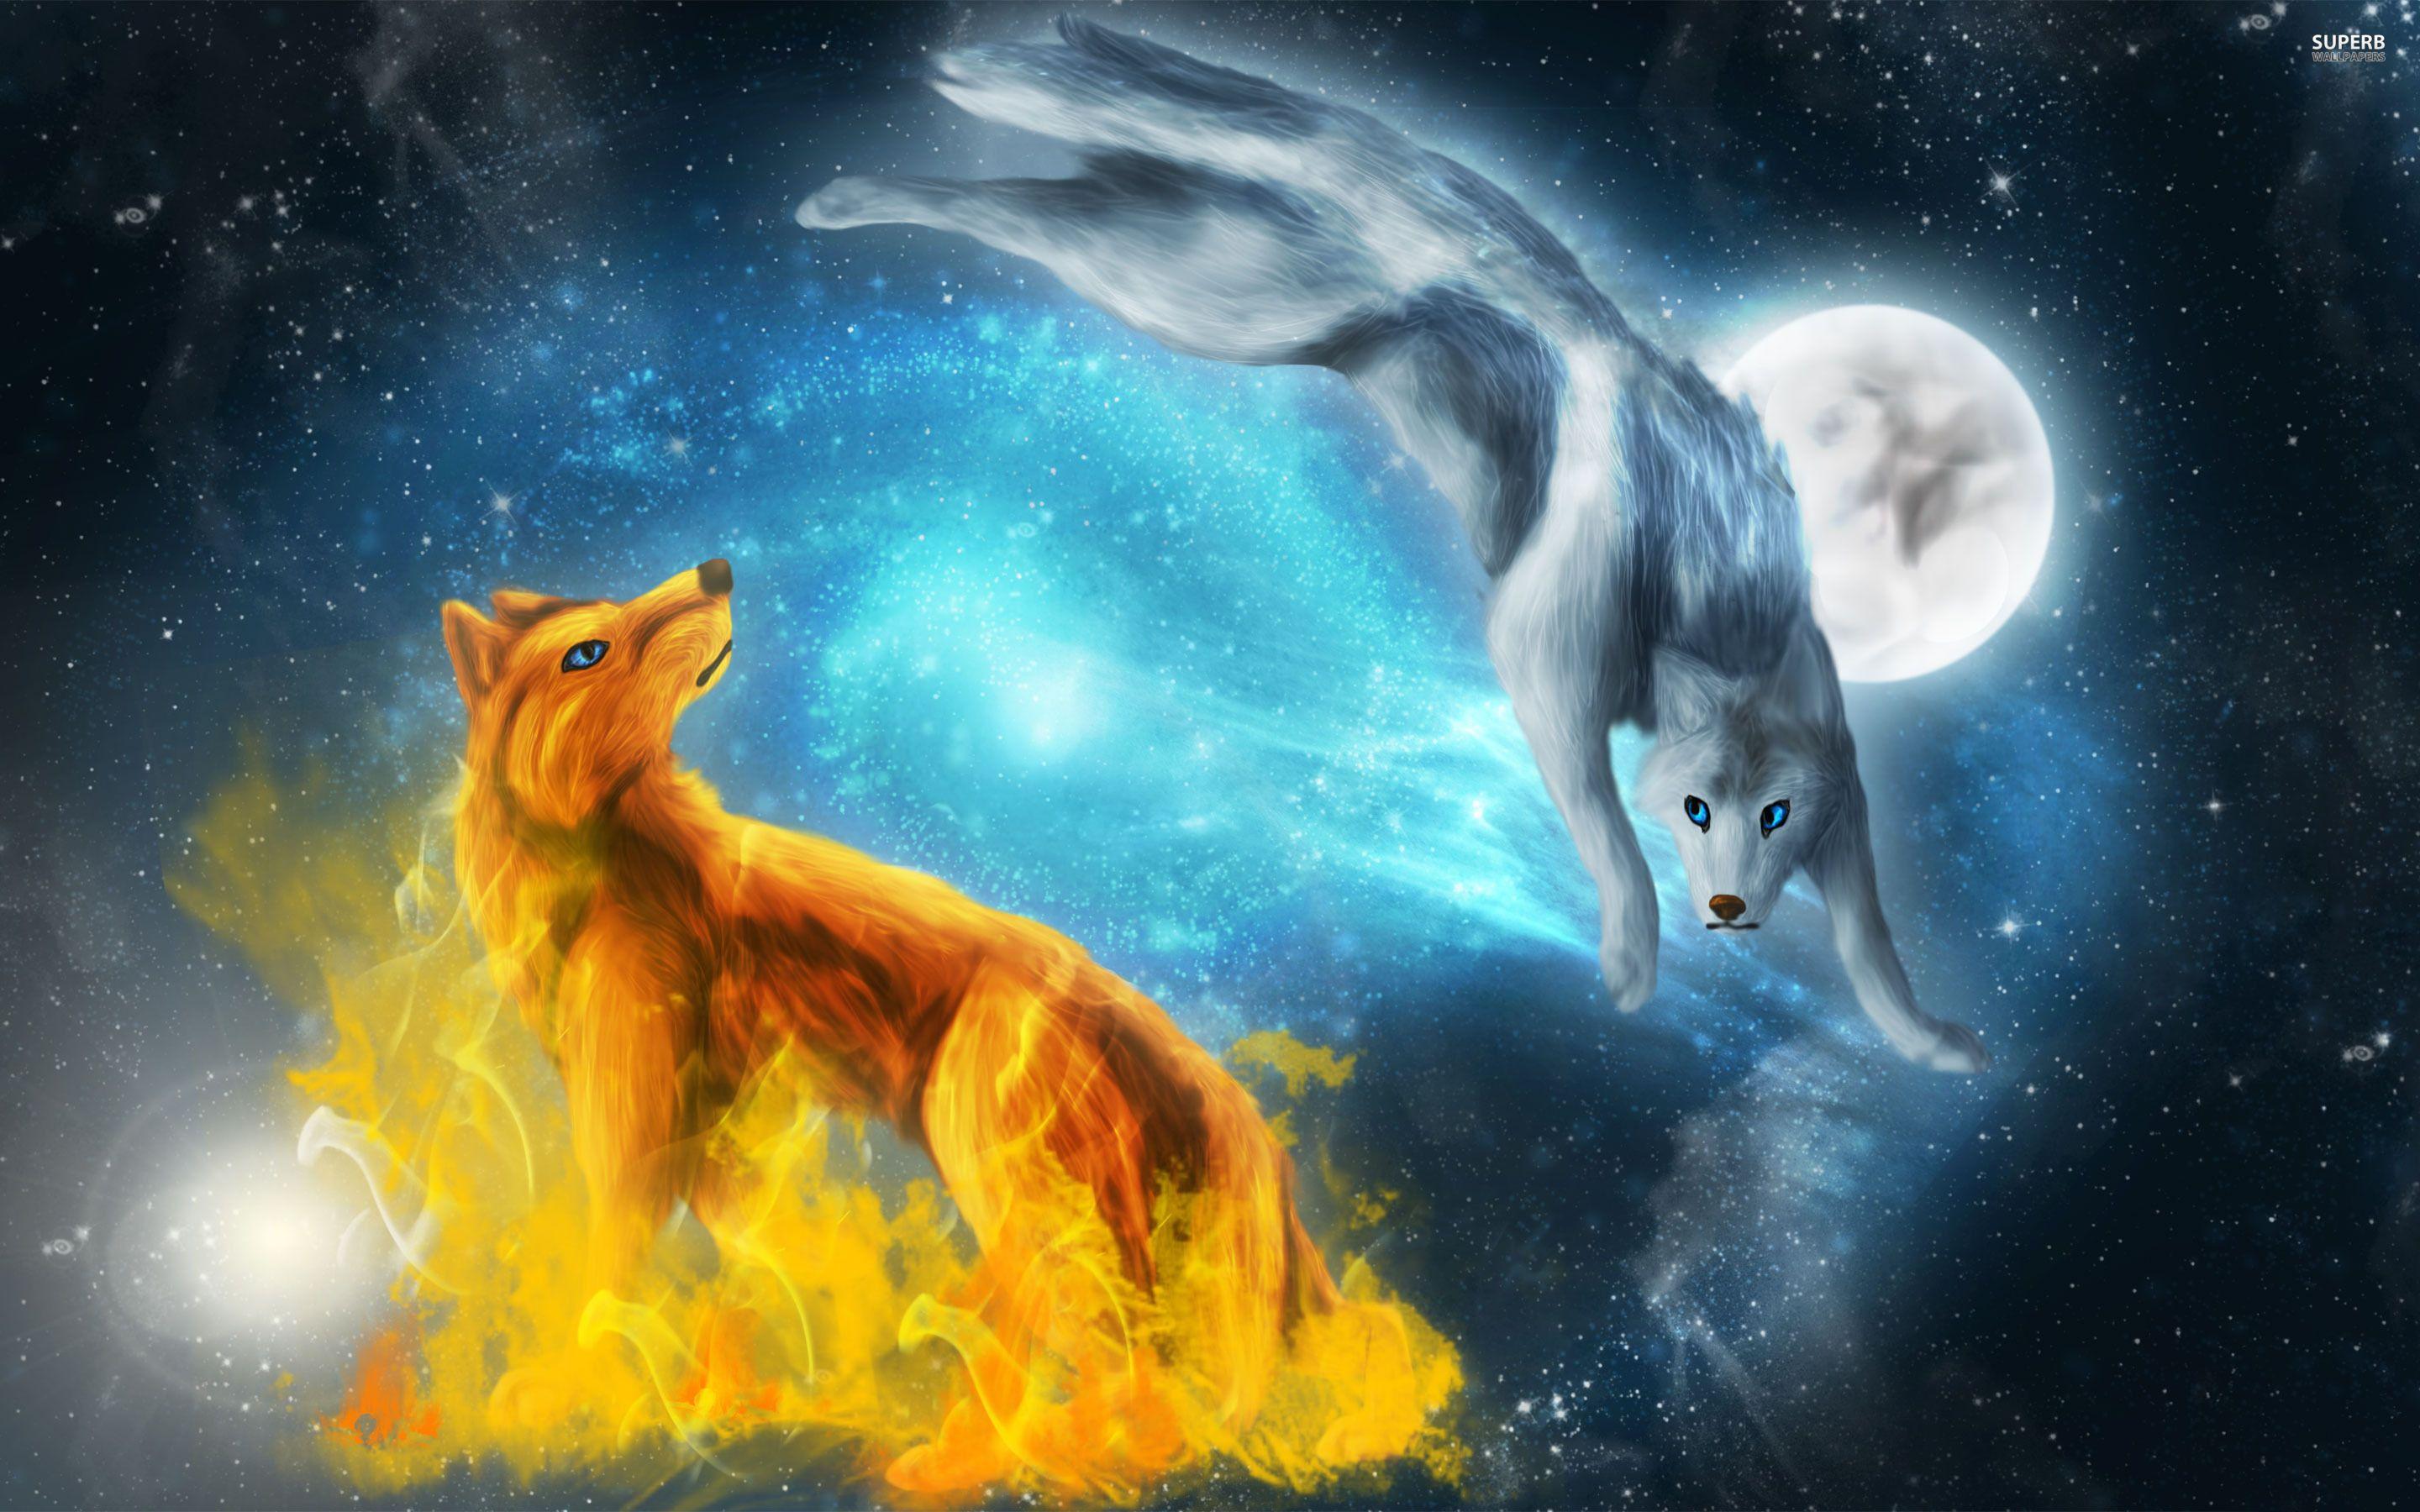 Fire and ice wolves Wallpaper HD For Desktop, Mobile And Tablet